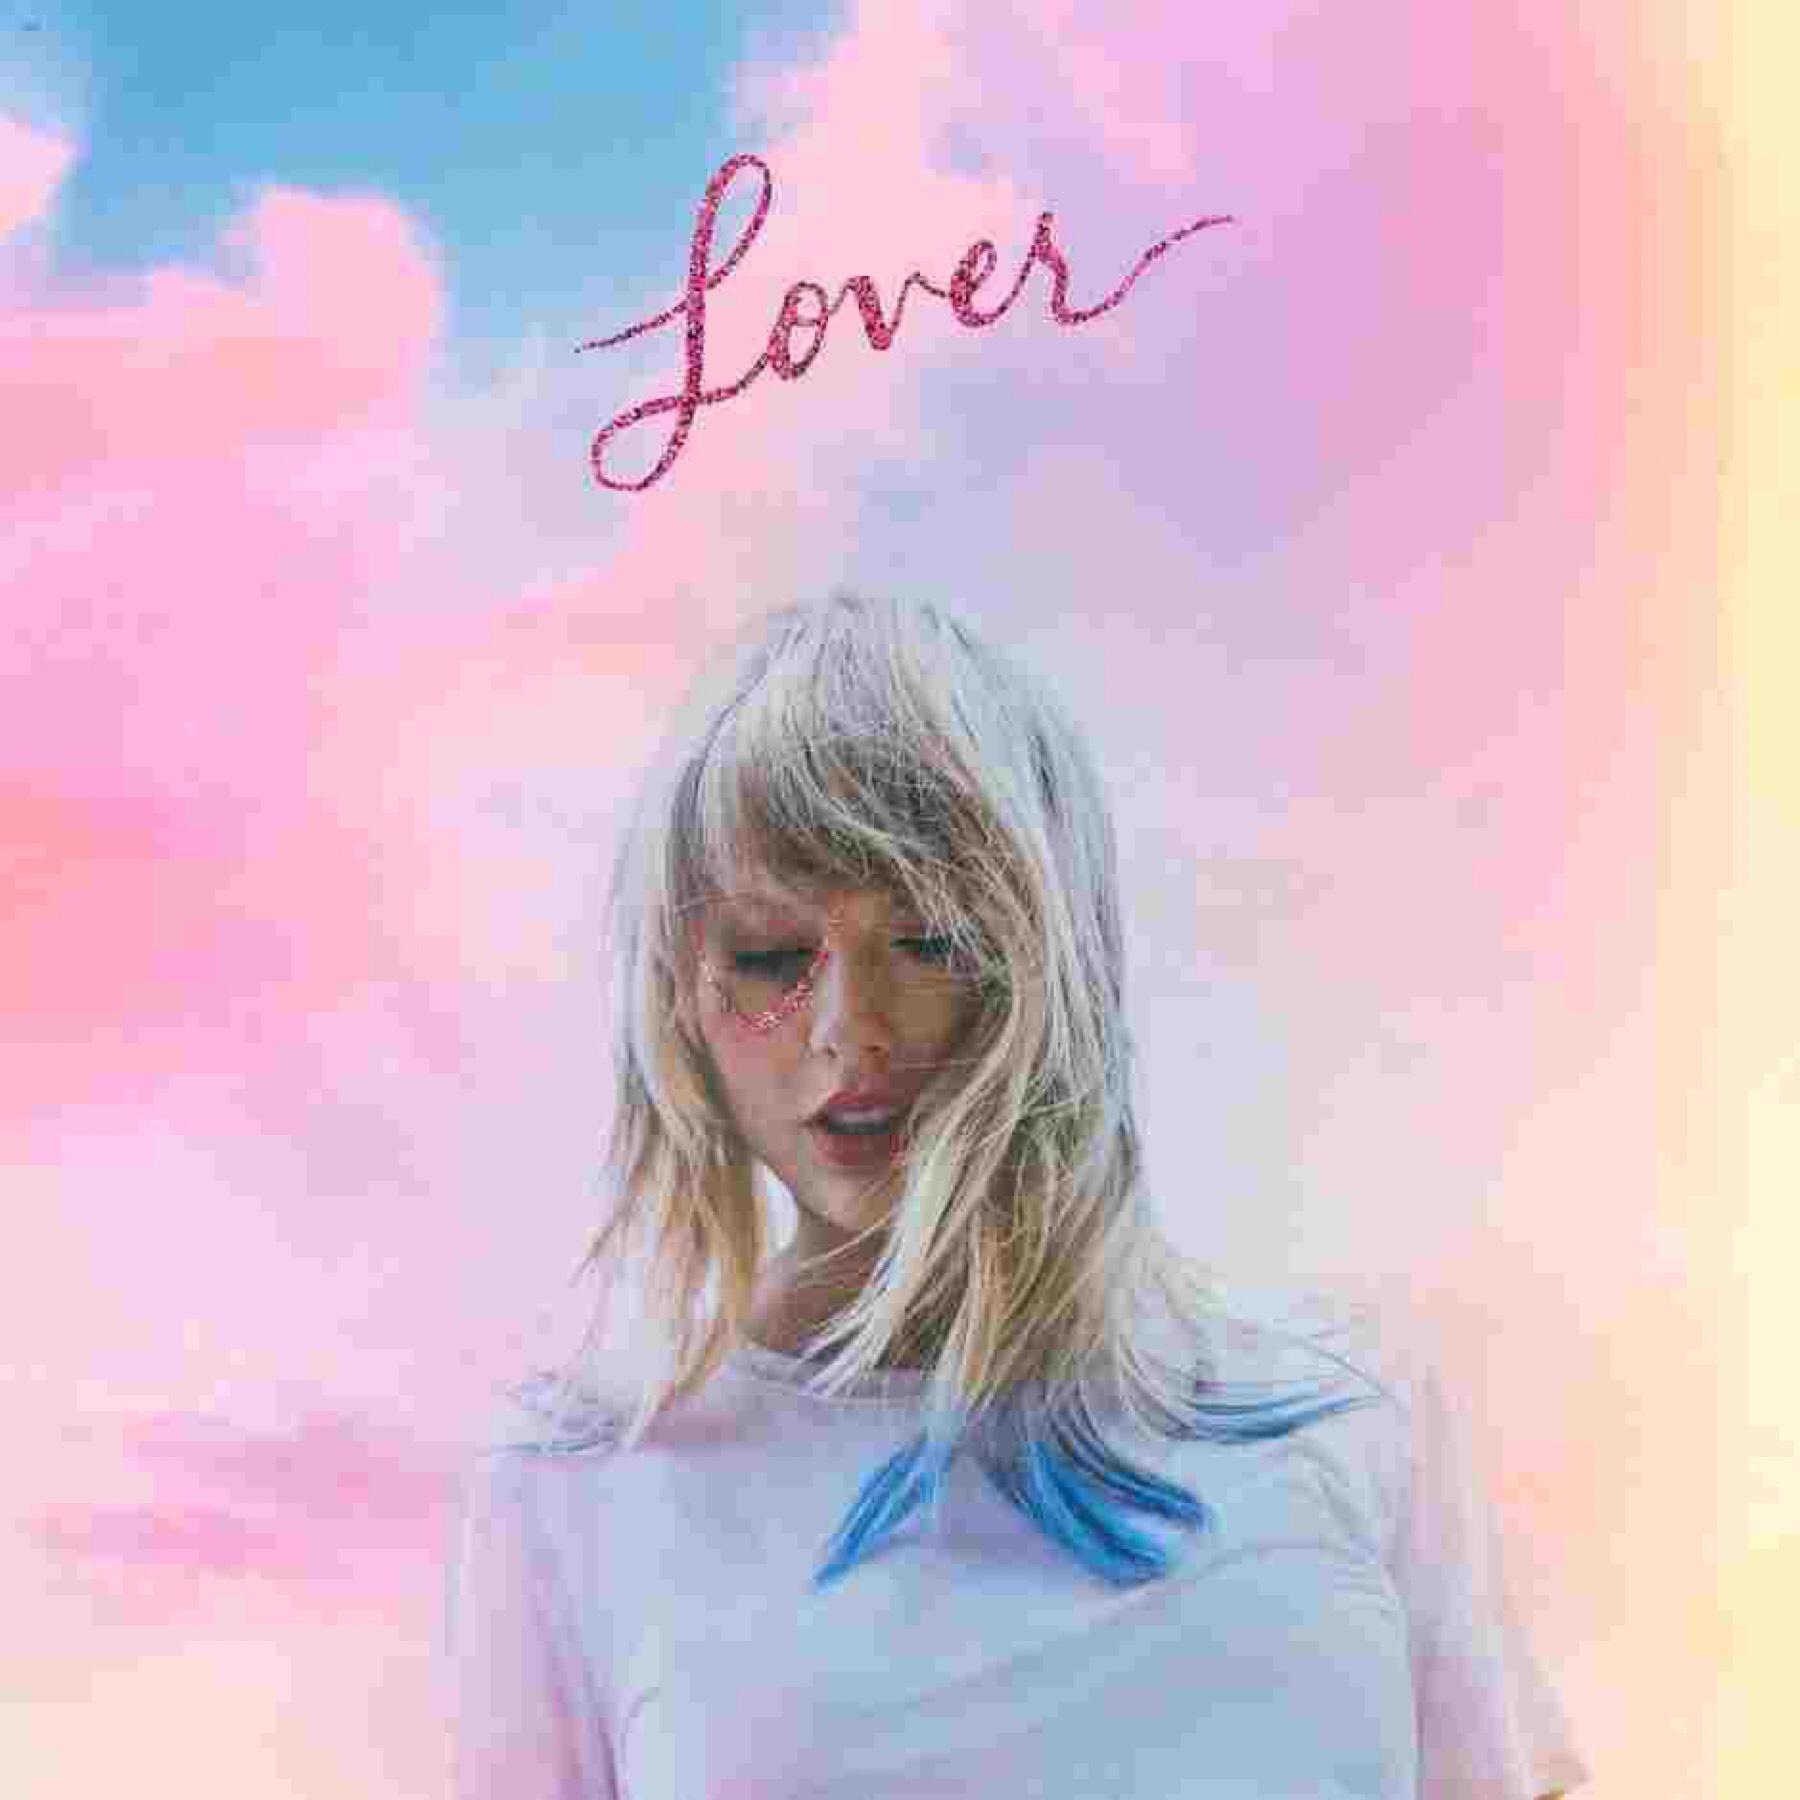 LOVER, Out August 23rd 💗